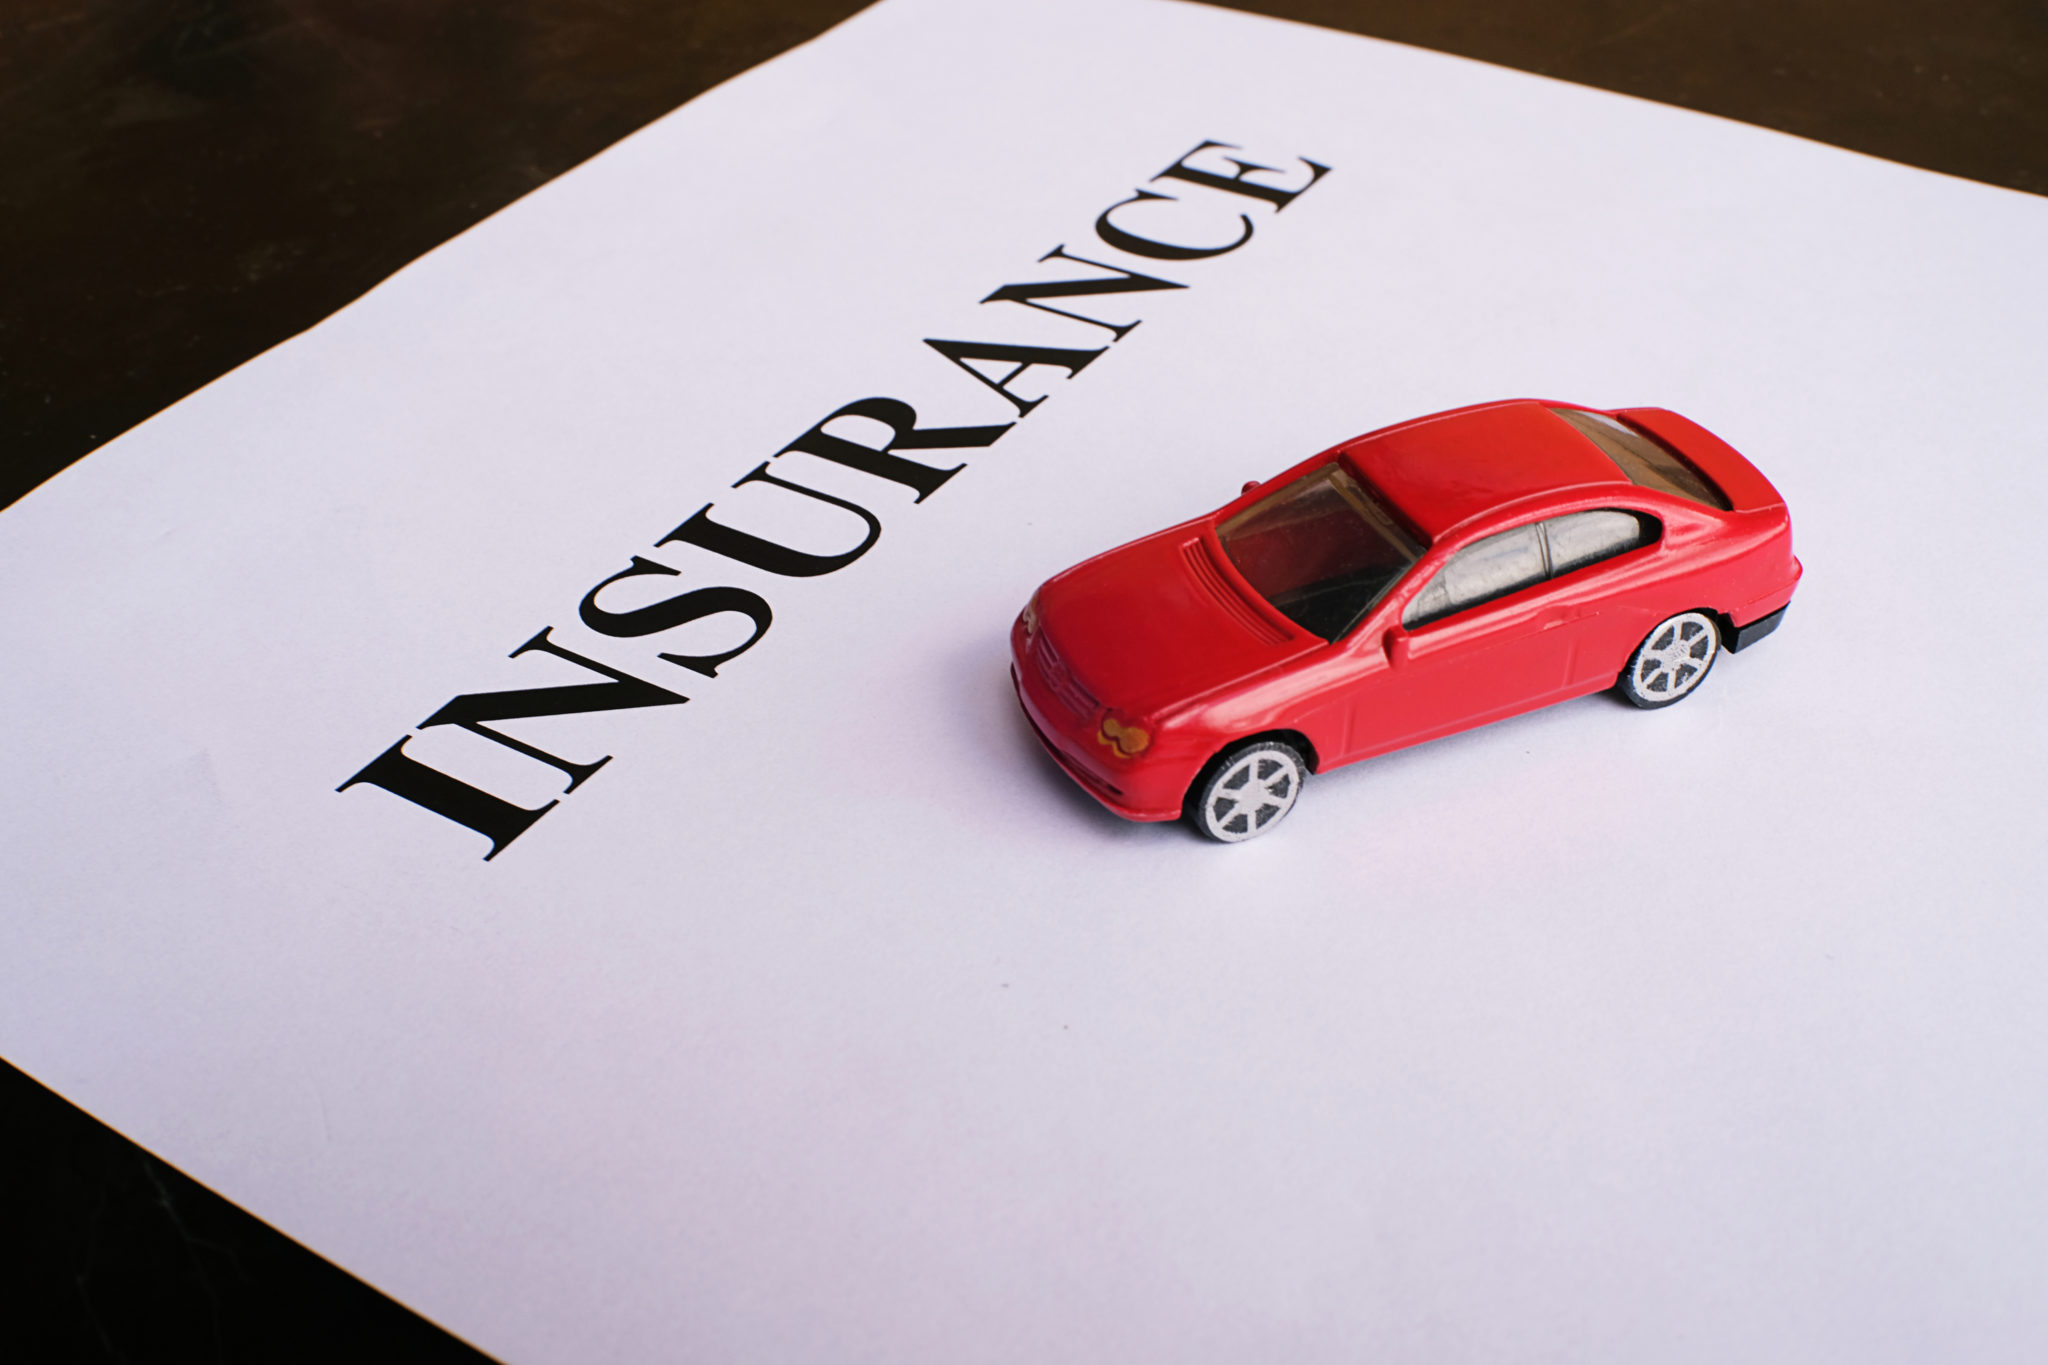 insurance form with miniature car